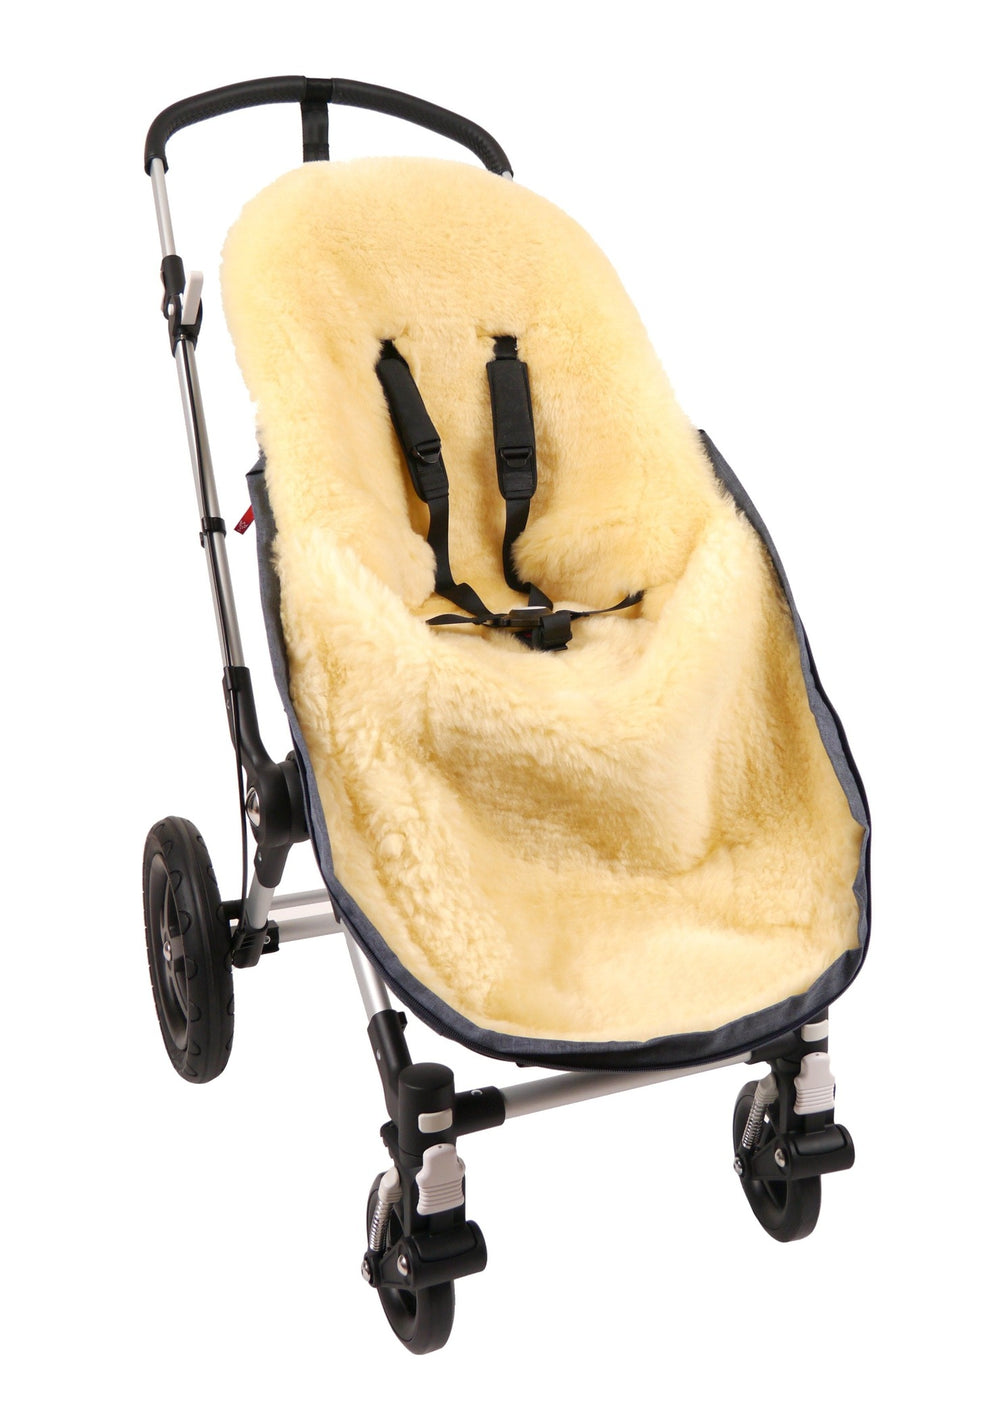 Quality Sheepskin for Warmth inside the Kaiser Premium Lambskin Footmuff in Black for Bugaboo® Pushchairs